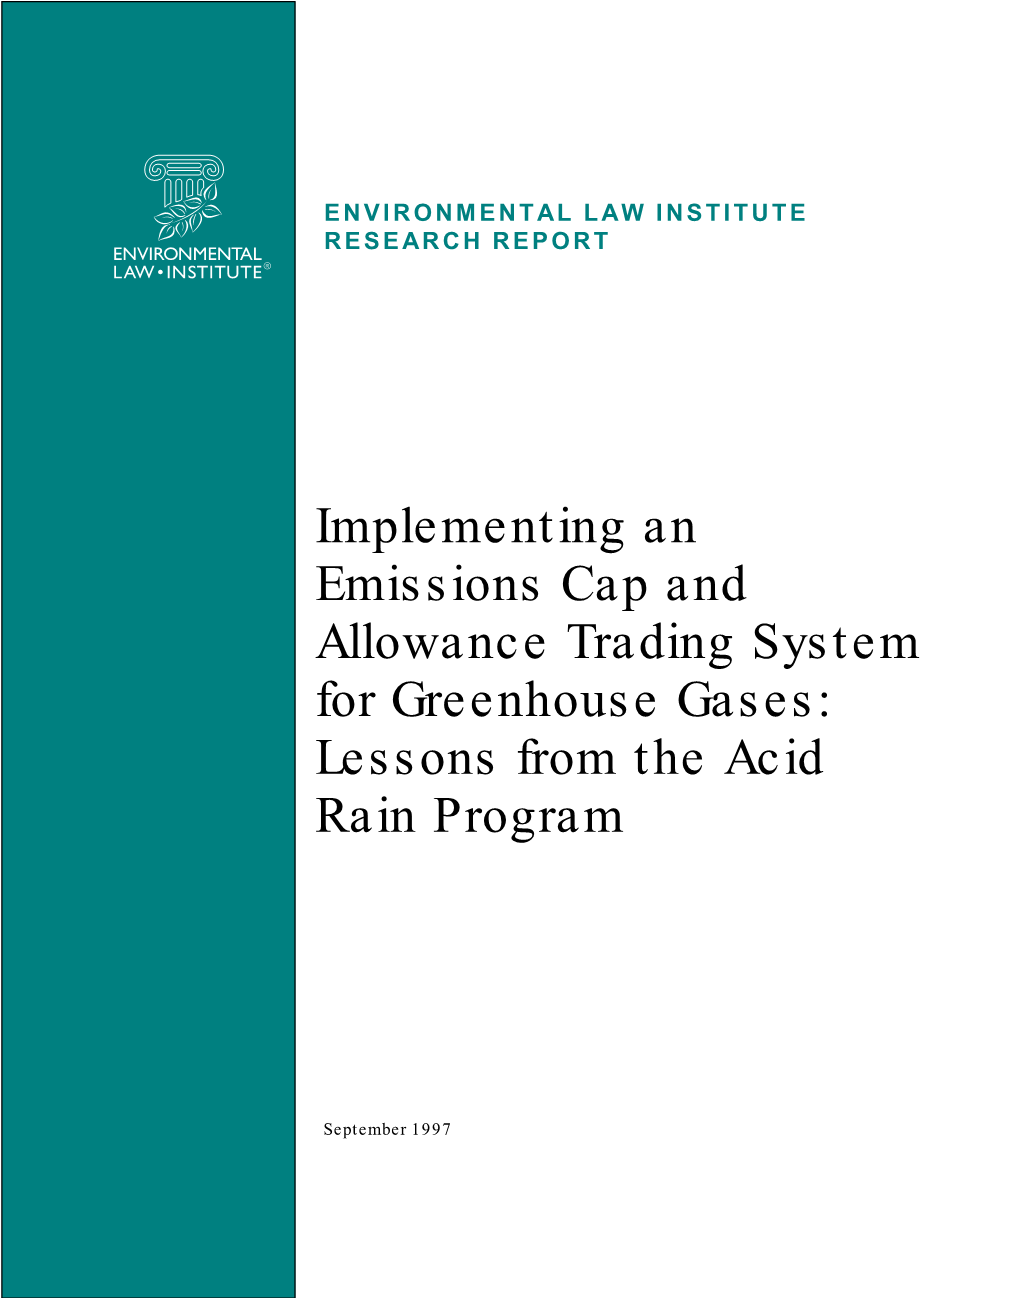 Implementing an Emissions Cap and Allowance Trading System for Greenhouse Gases: Lessons from the Acid Rain Program